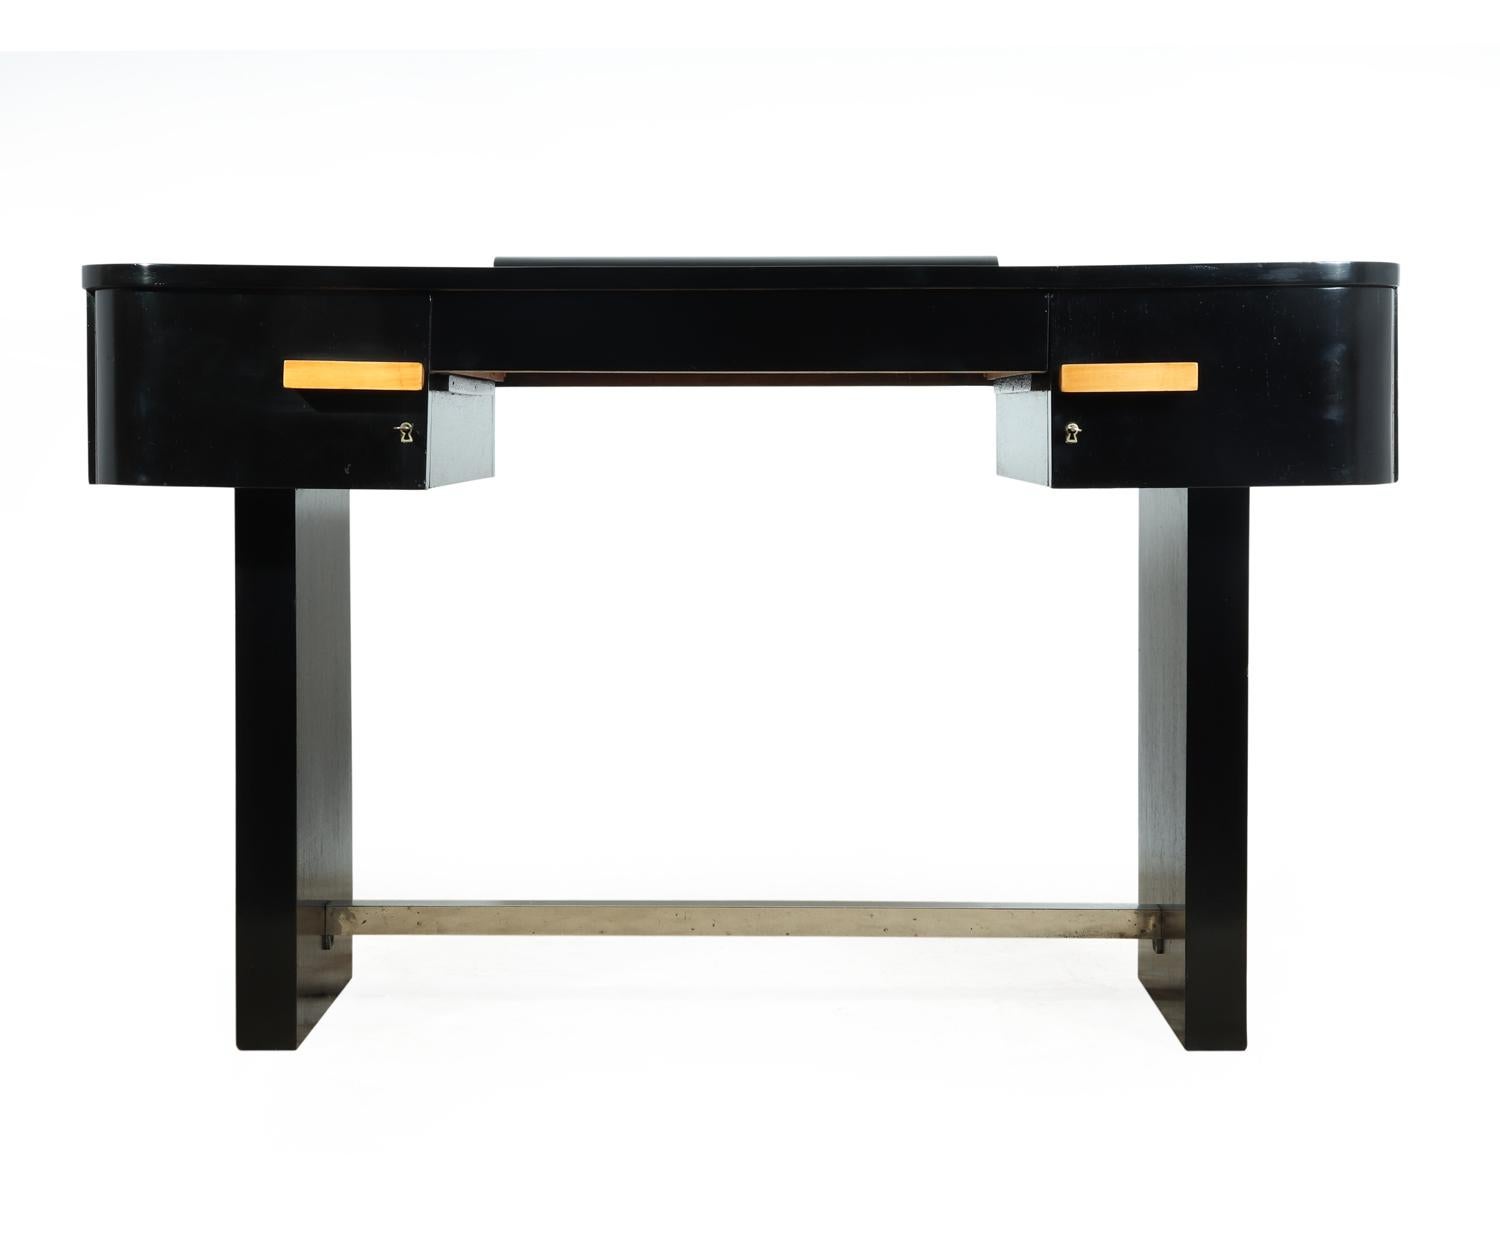 Art Deco desk piano lacquer black finish with leather inset top
This small Art Deco period writing table has a central drawer and lockable cupboard doors either side, chromed brass footrest, and leather inset top, the desk has been fully restored